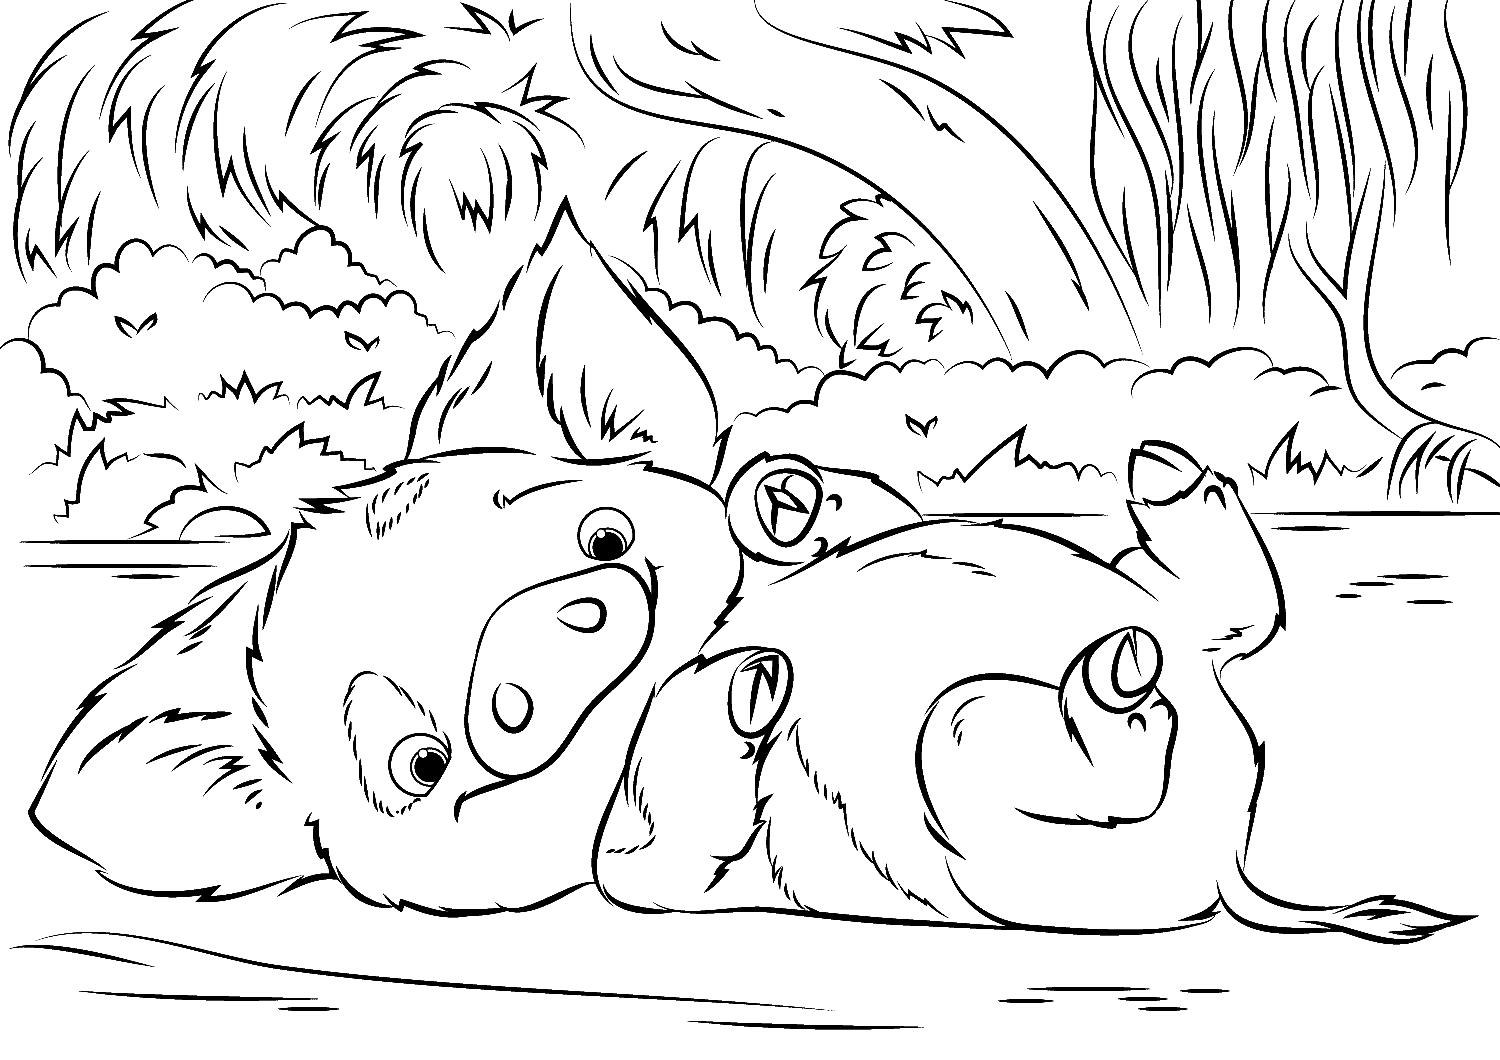 Pua Pet Pig from Moana from Moana Coloring Page